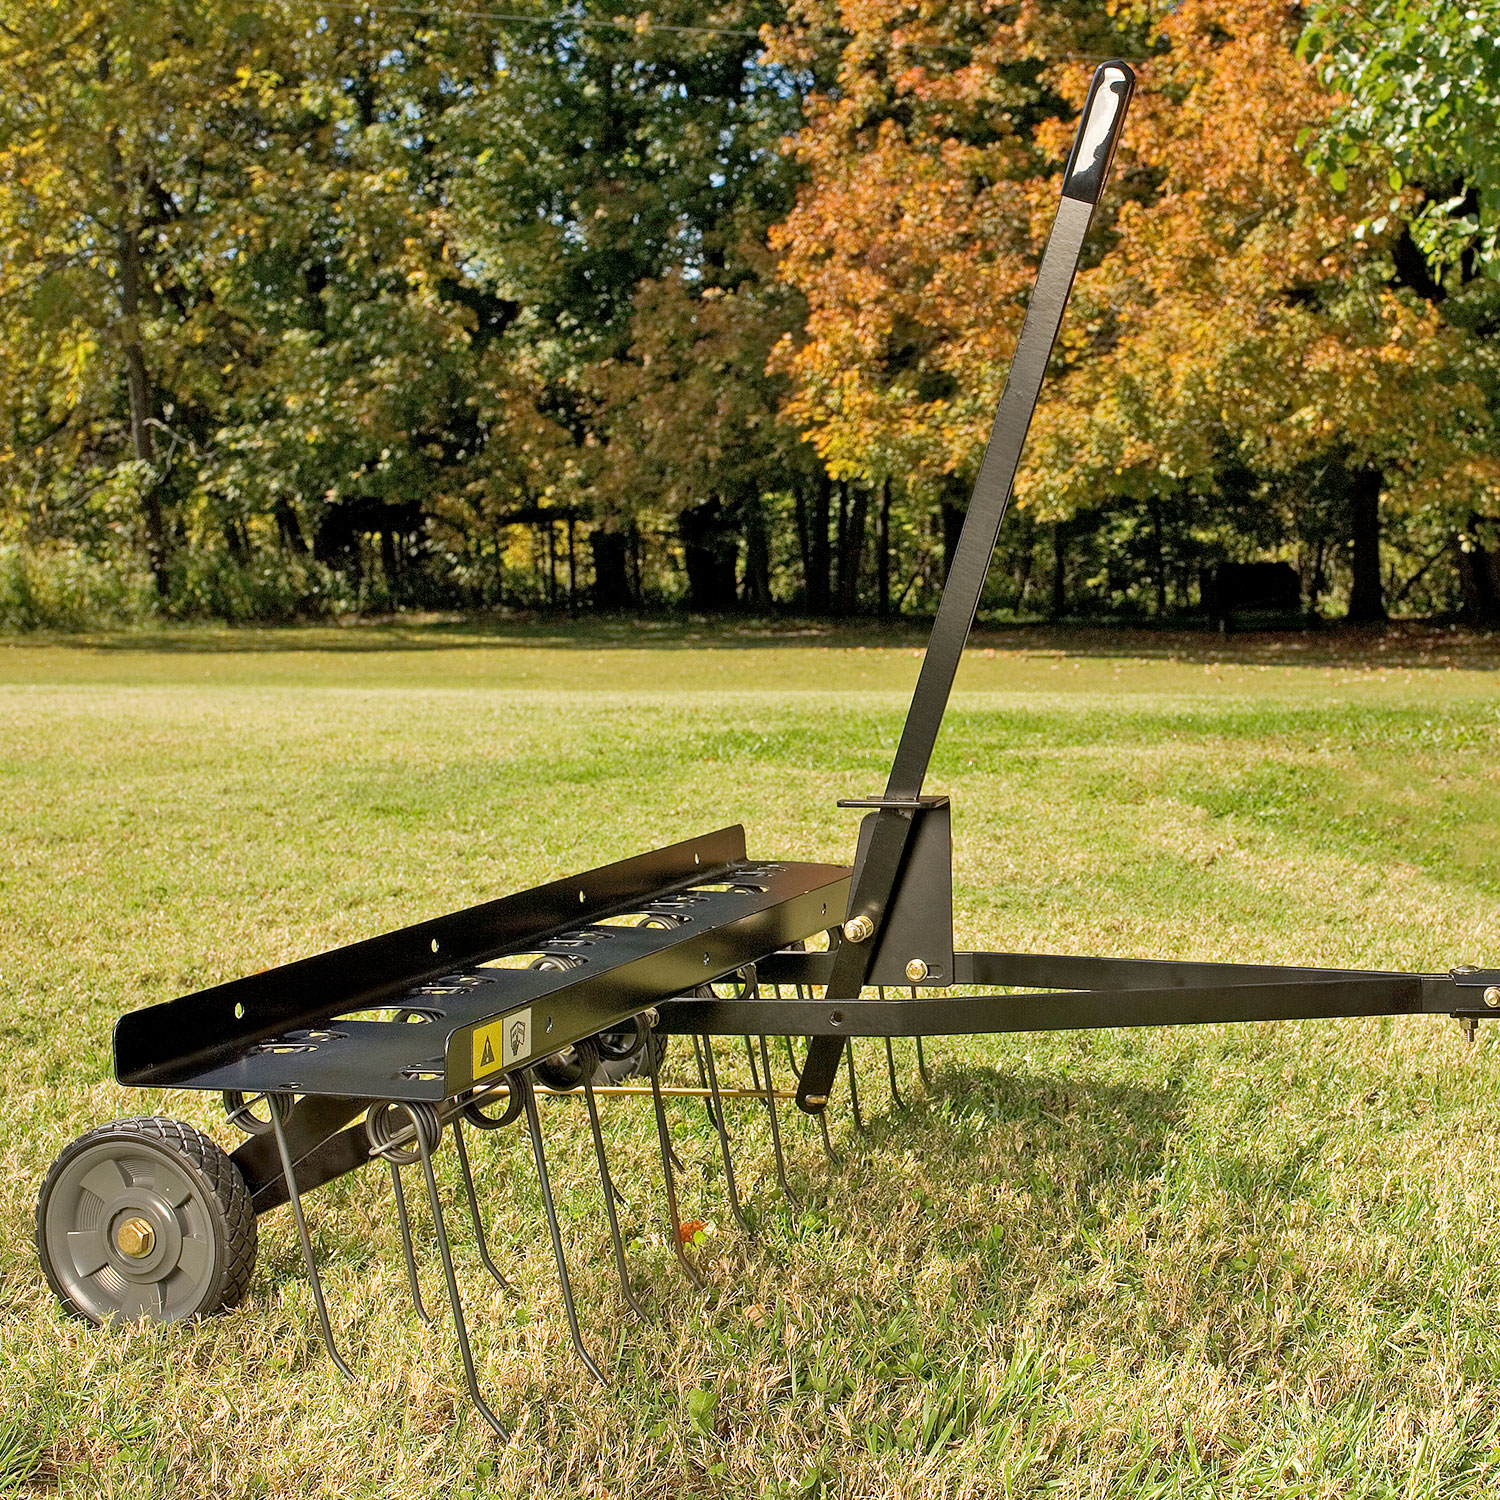 Brinly-Hardy 40 Tow-Behind Dethatcher Steel Frame For Most riding Lawn tractors 